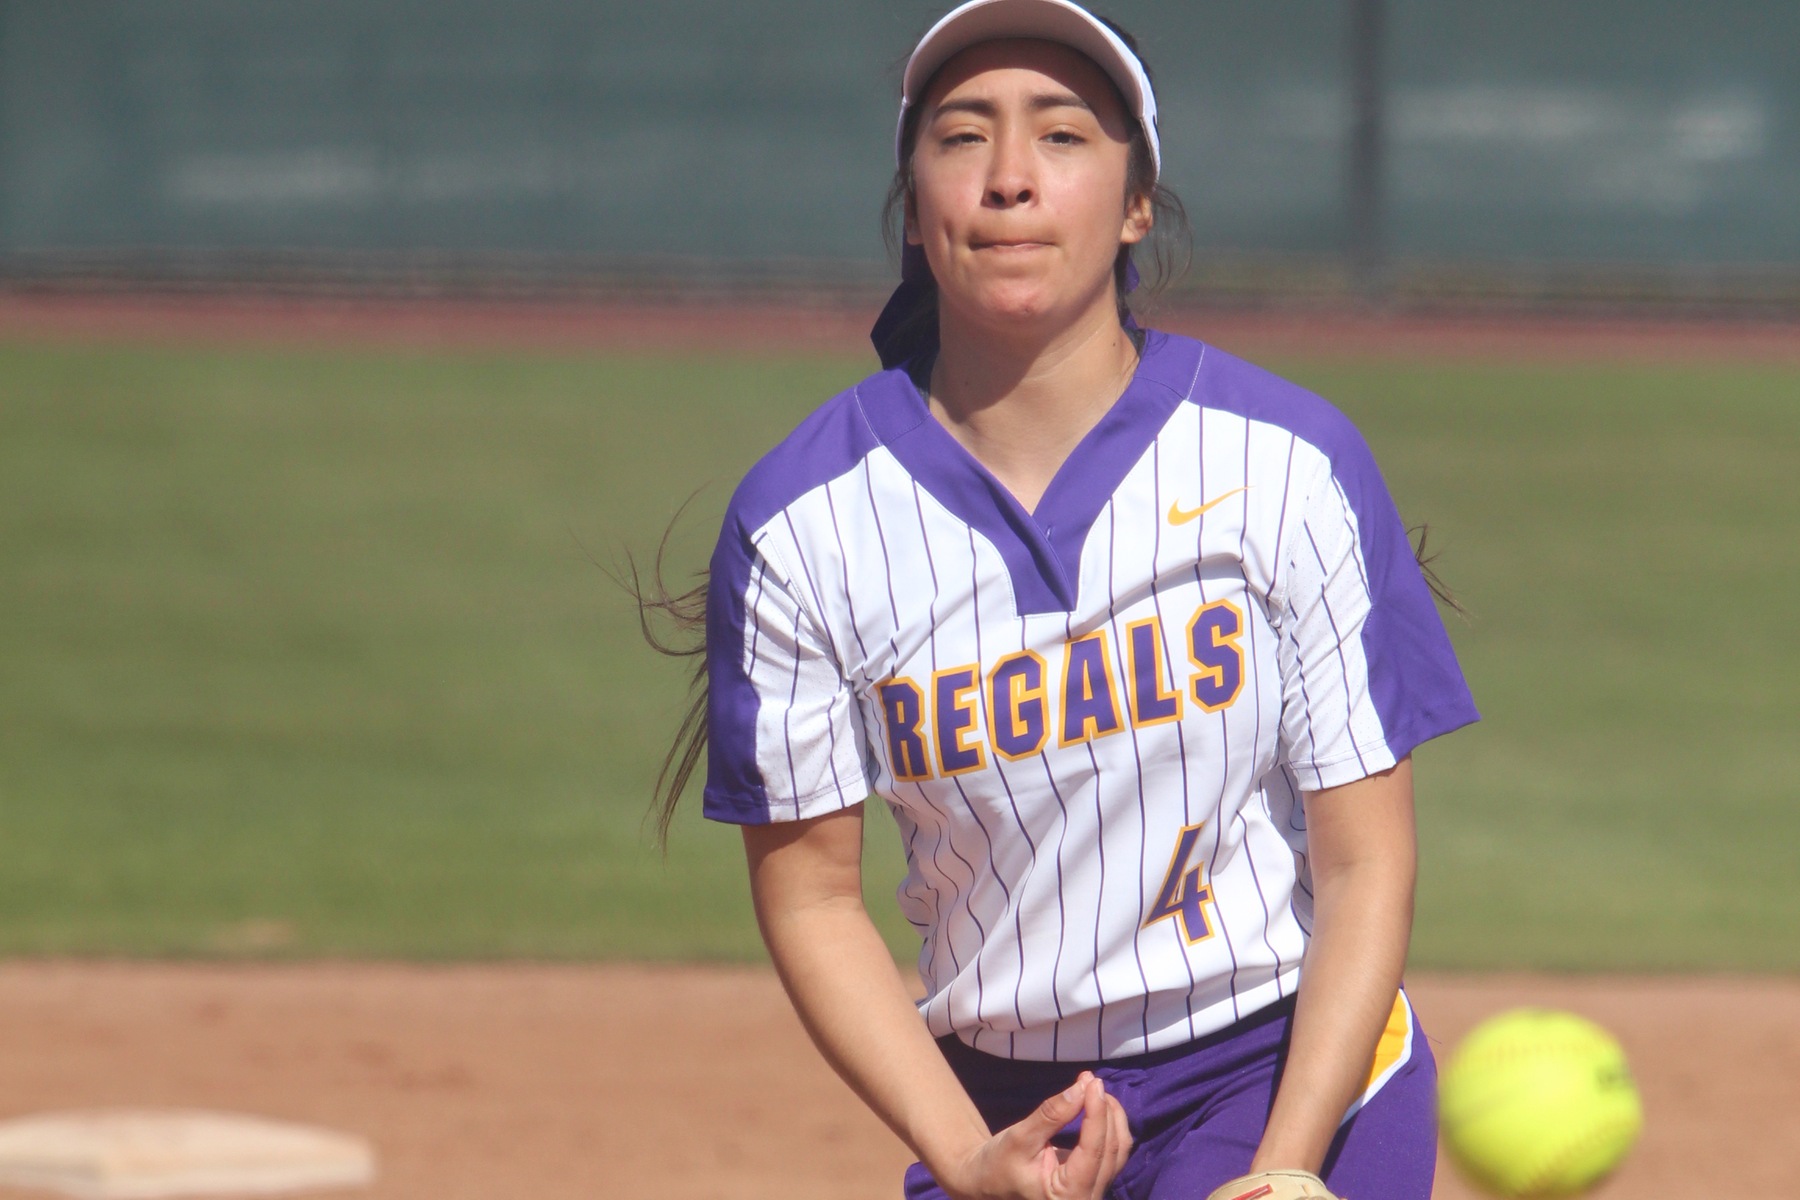 Sienna Perez pitched a complete game as Regals softball defeated the Sagehens, 5-3, in game one of a doubleheader.